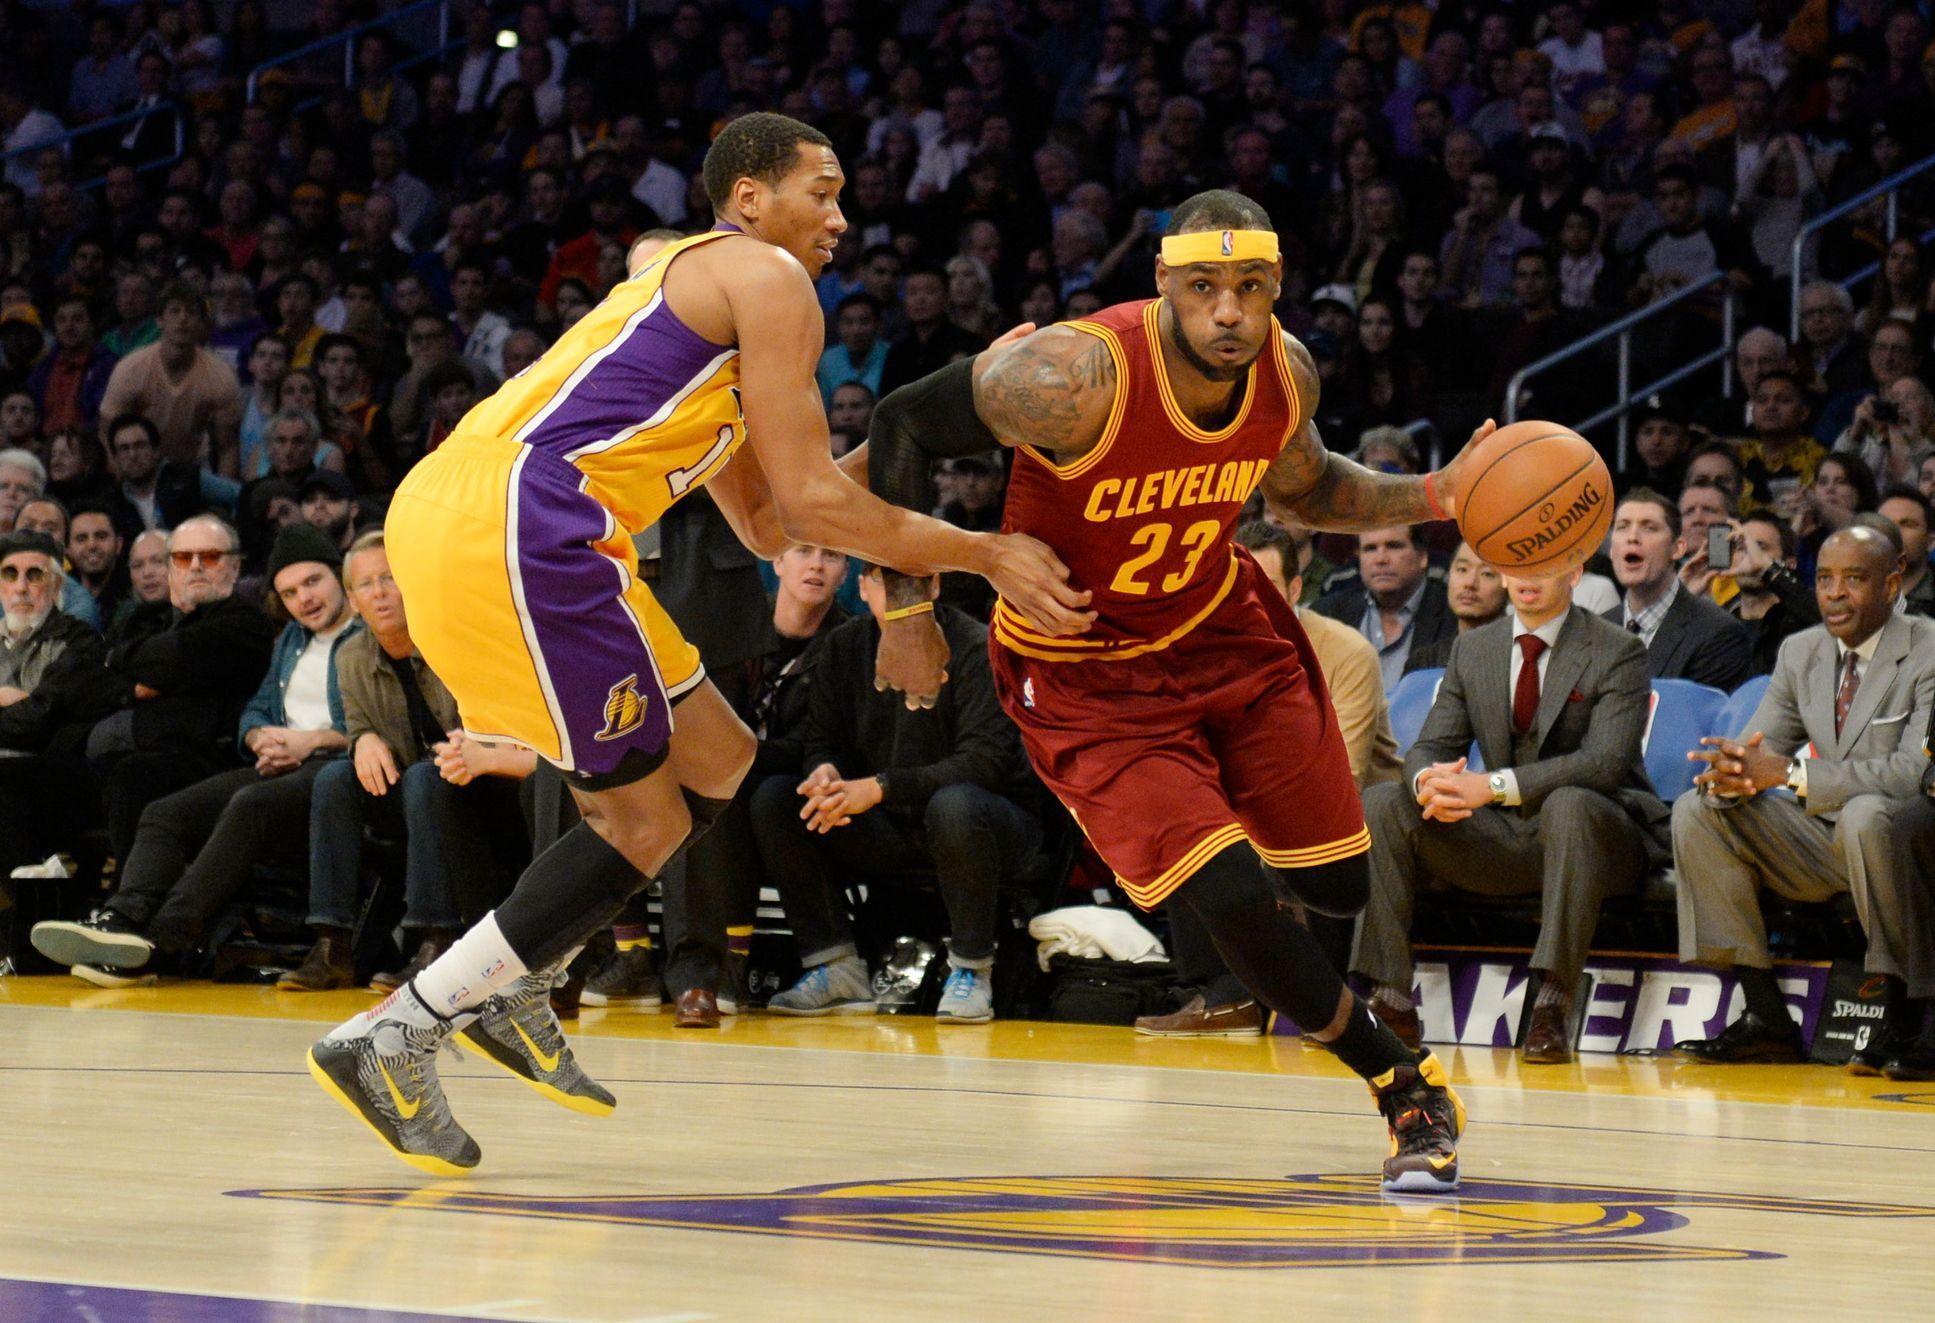 Los Angeles Lakers - Cleveland Cavaliers: LeBron James